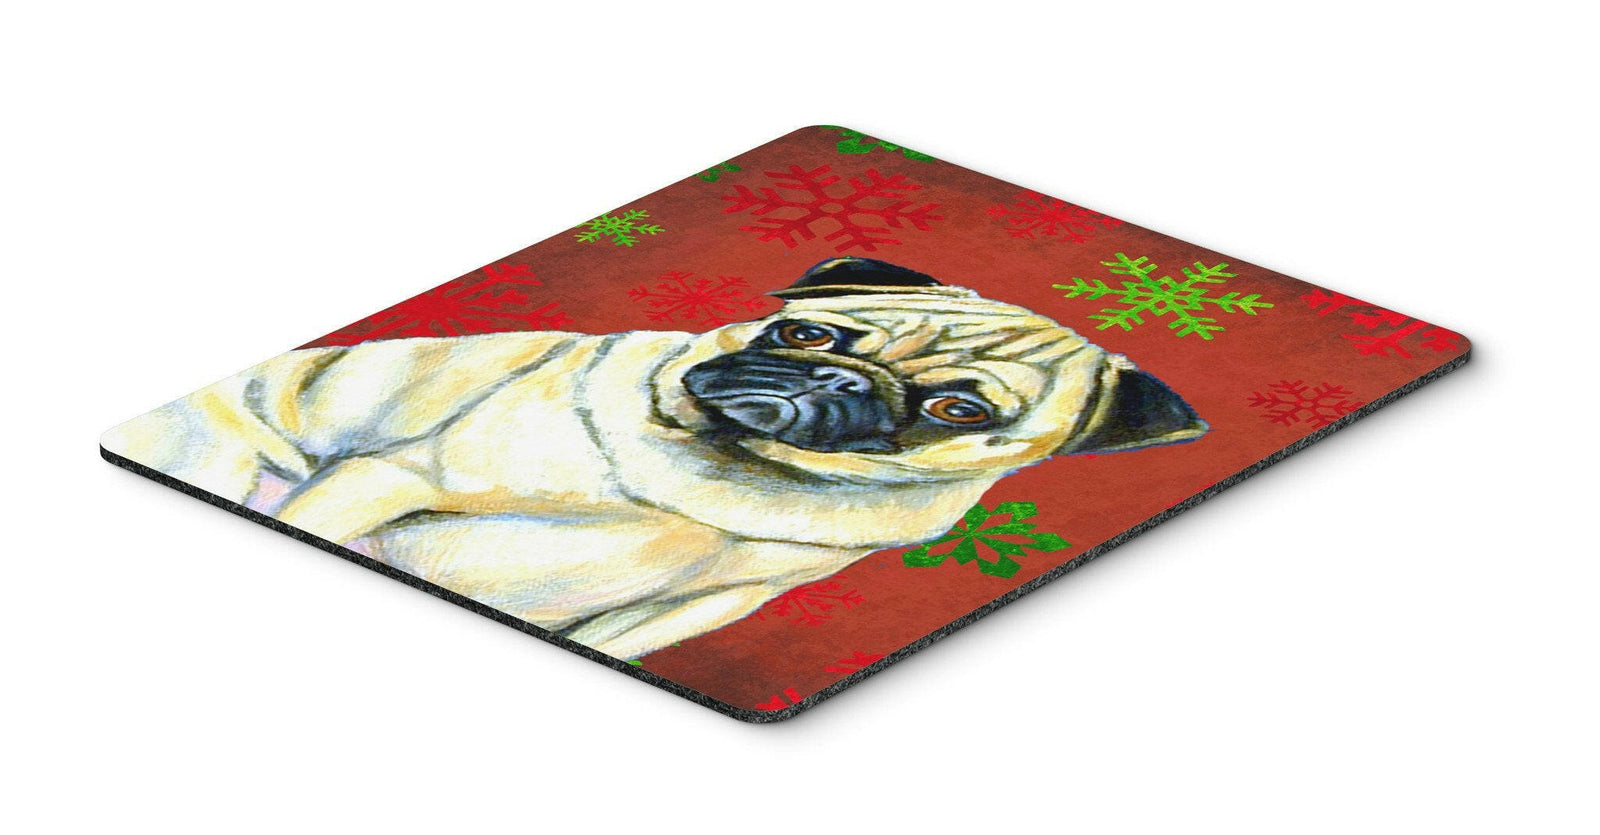 Pug Red and Green Snowflakes Holiday Christmas Mouse Pad, Hot Pad or Trivet by Caroline's Treasures